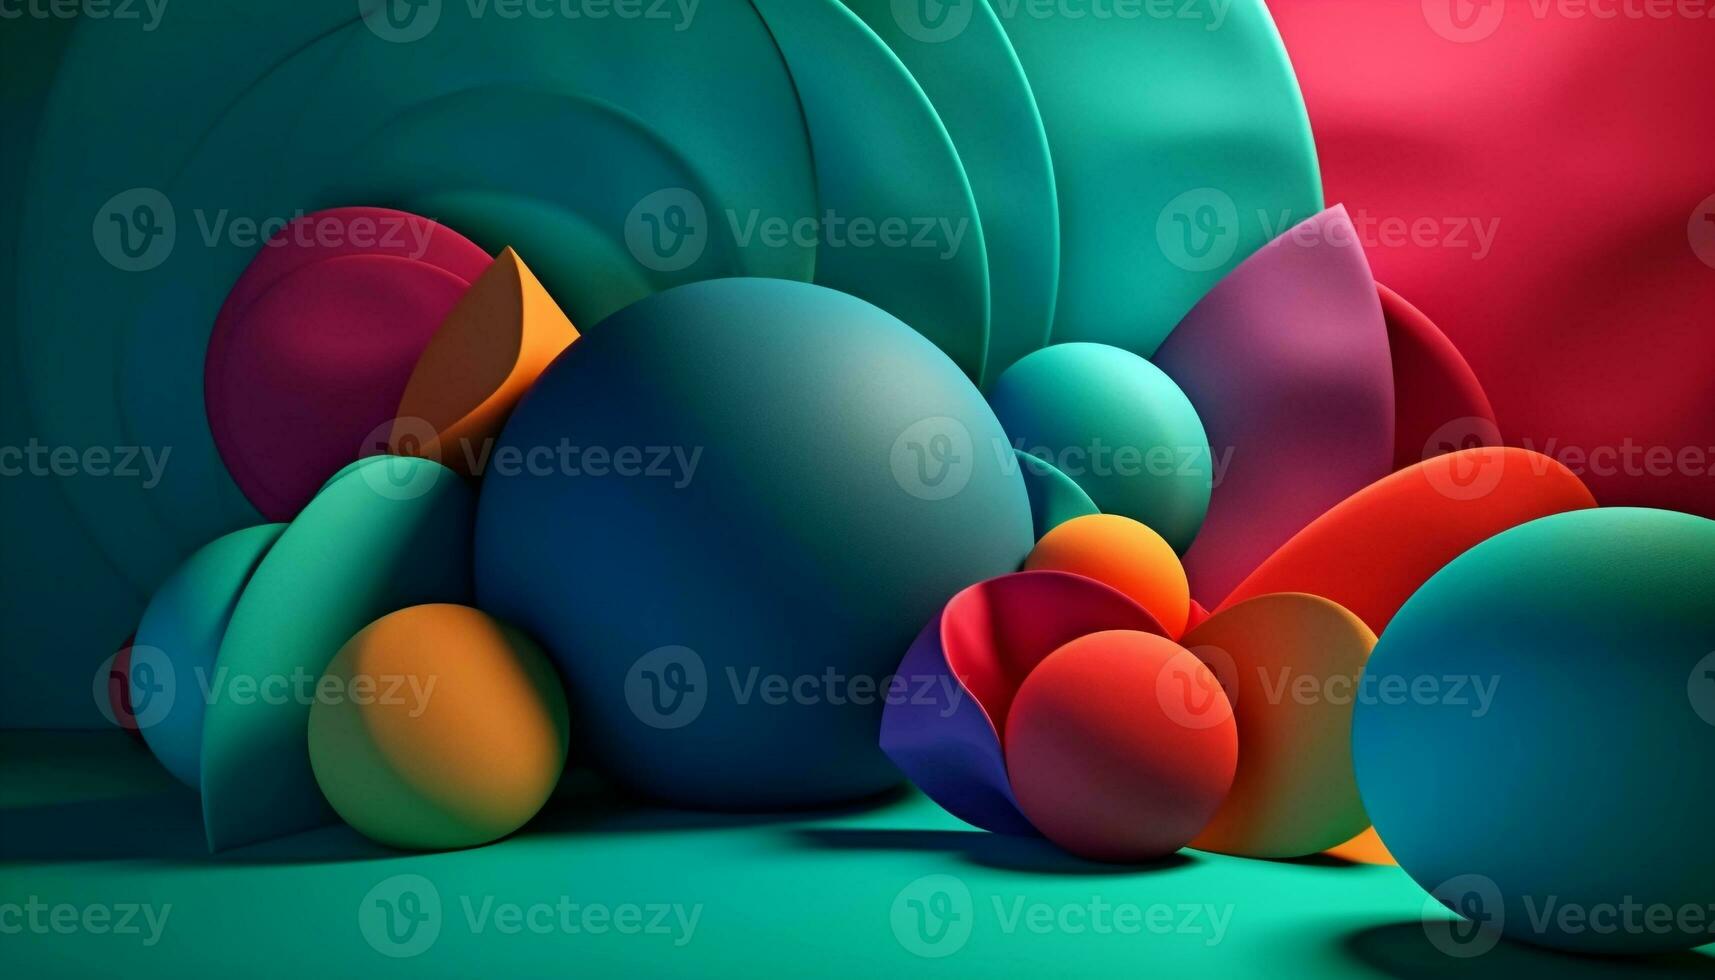 Vibrant colored balloons symbolize birthday celebration fun generated by AI photo